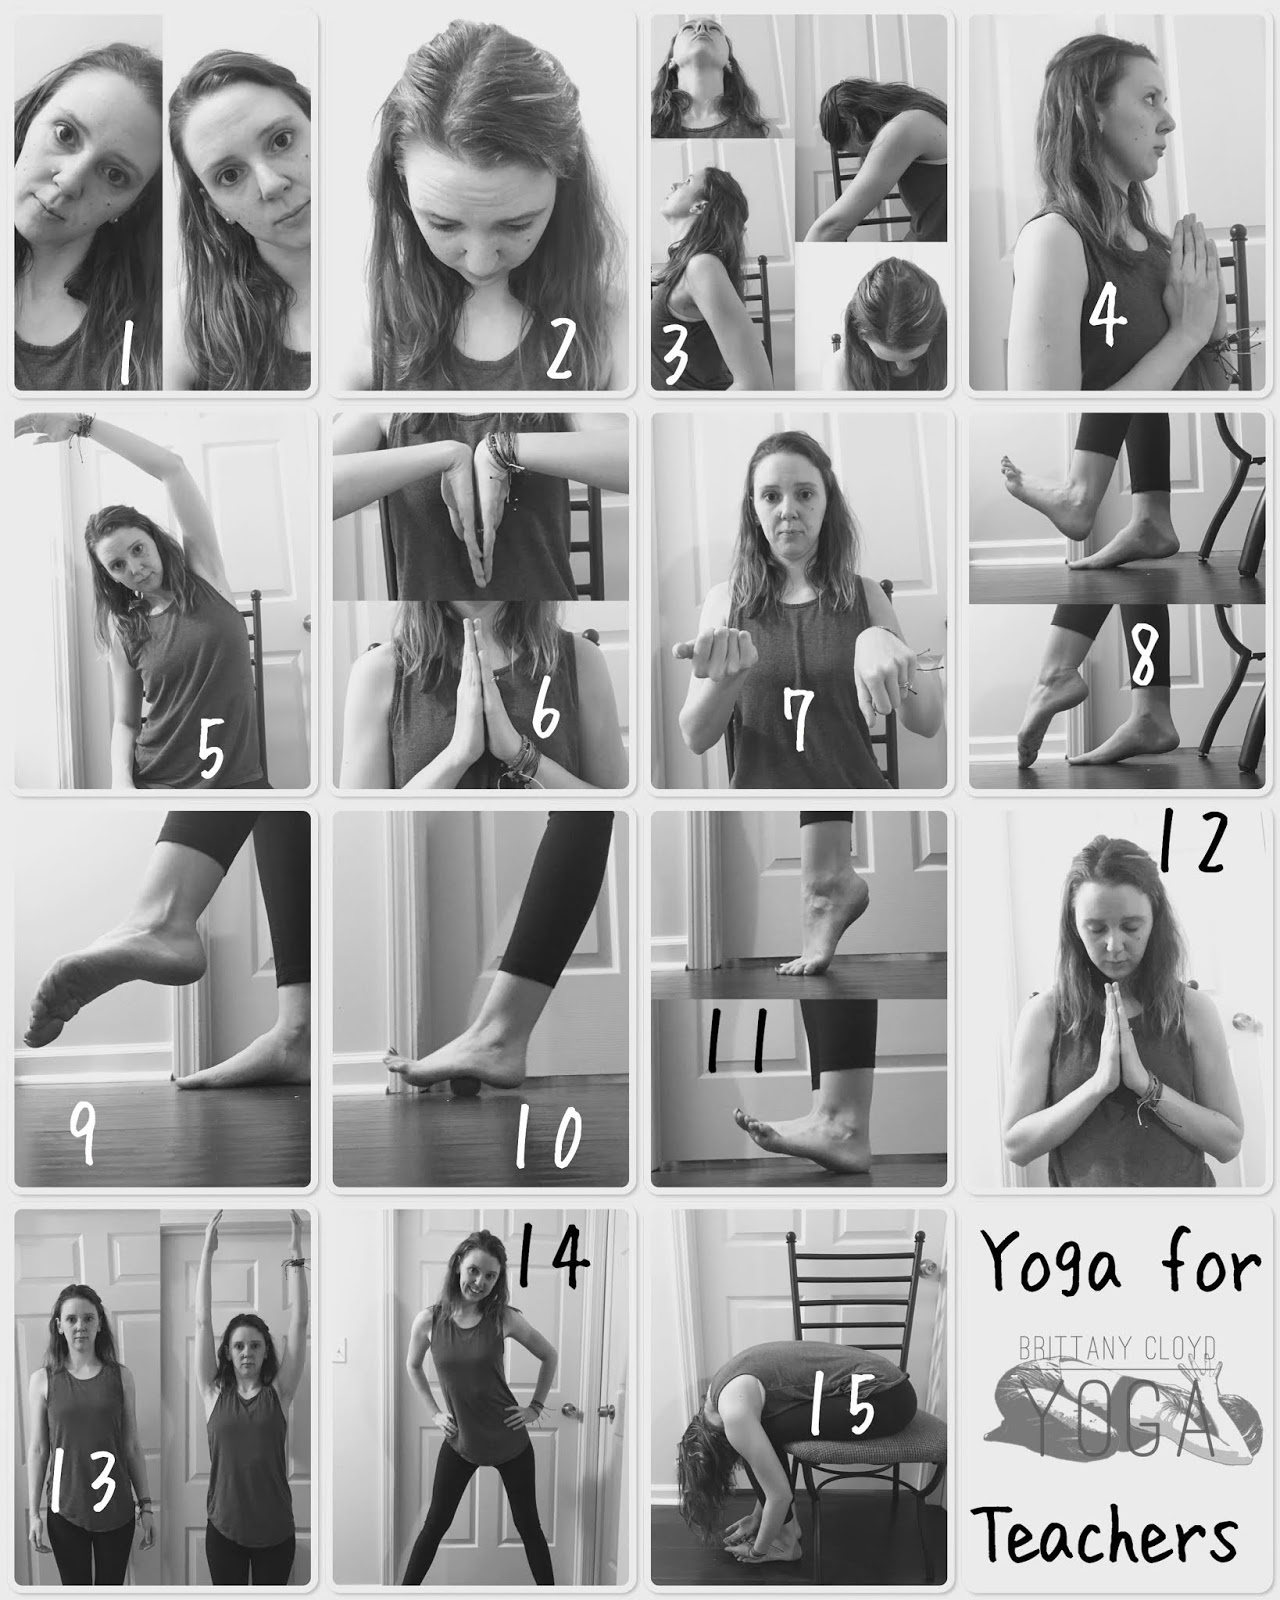 15 Yoga Poses Poster, Anxiety Coping Calming Corner Tools Calm Down Corner  School Counselor Psychology Aid Grounding Technique Social Worker - Etsy